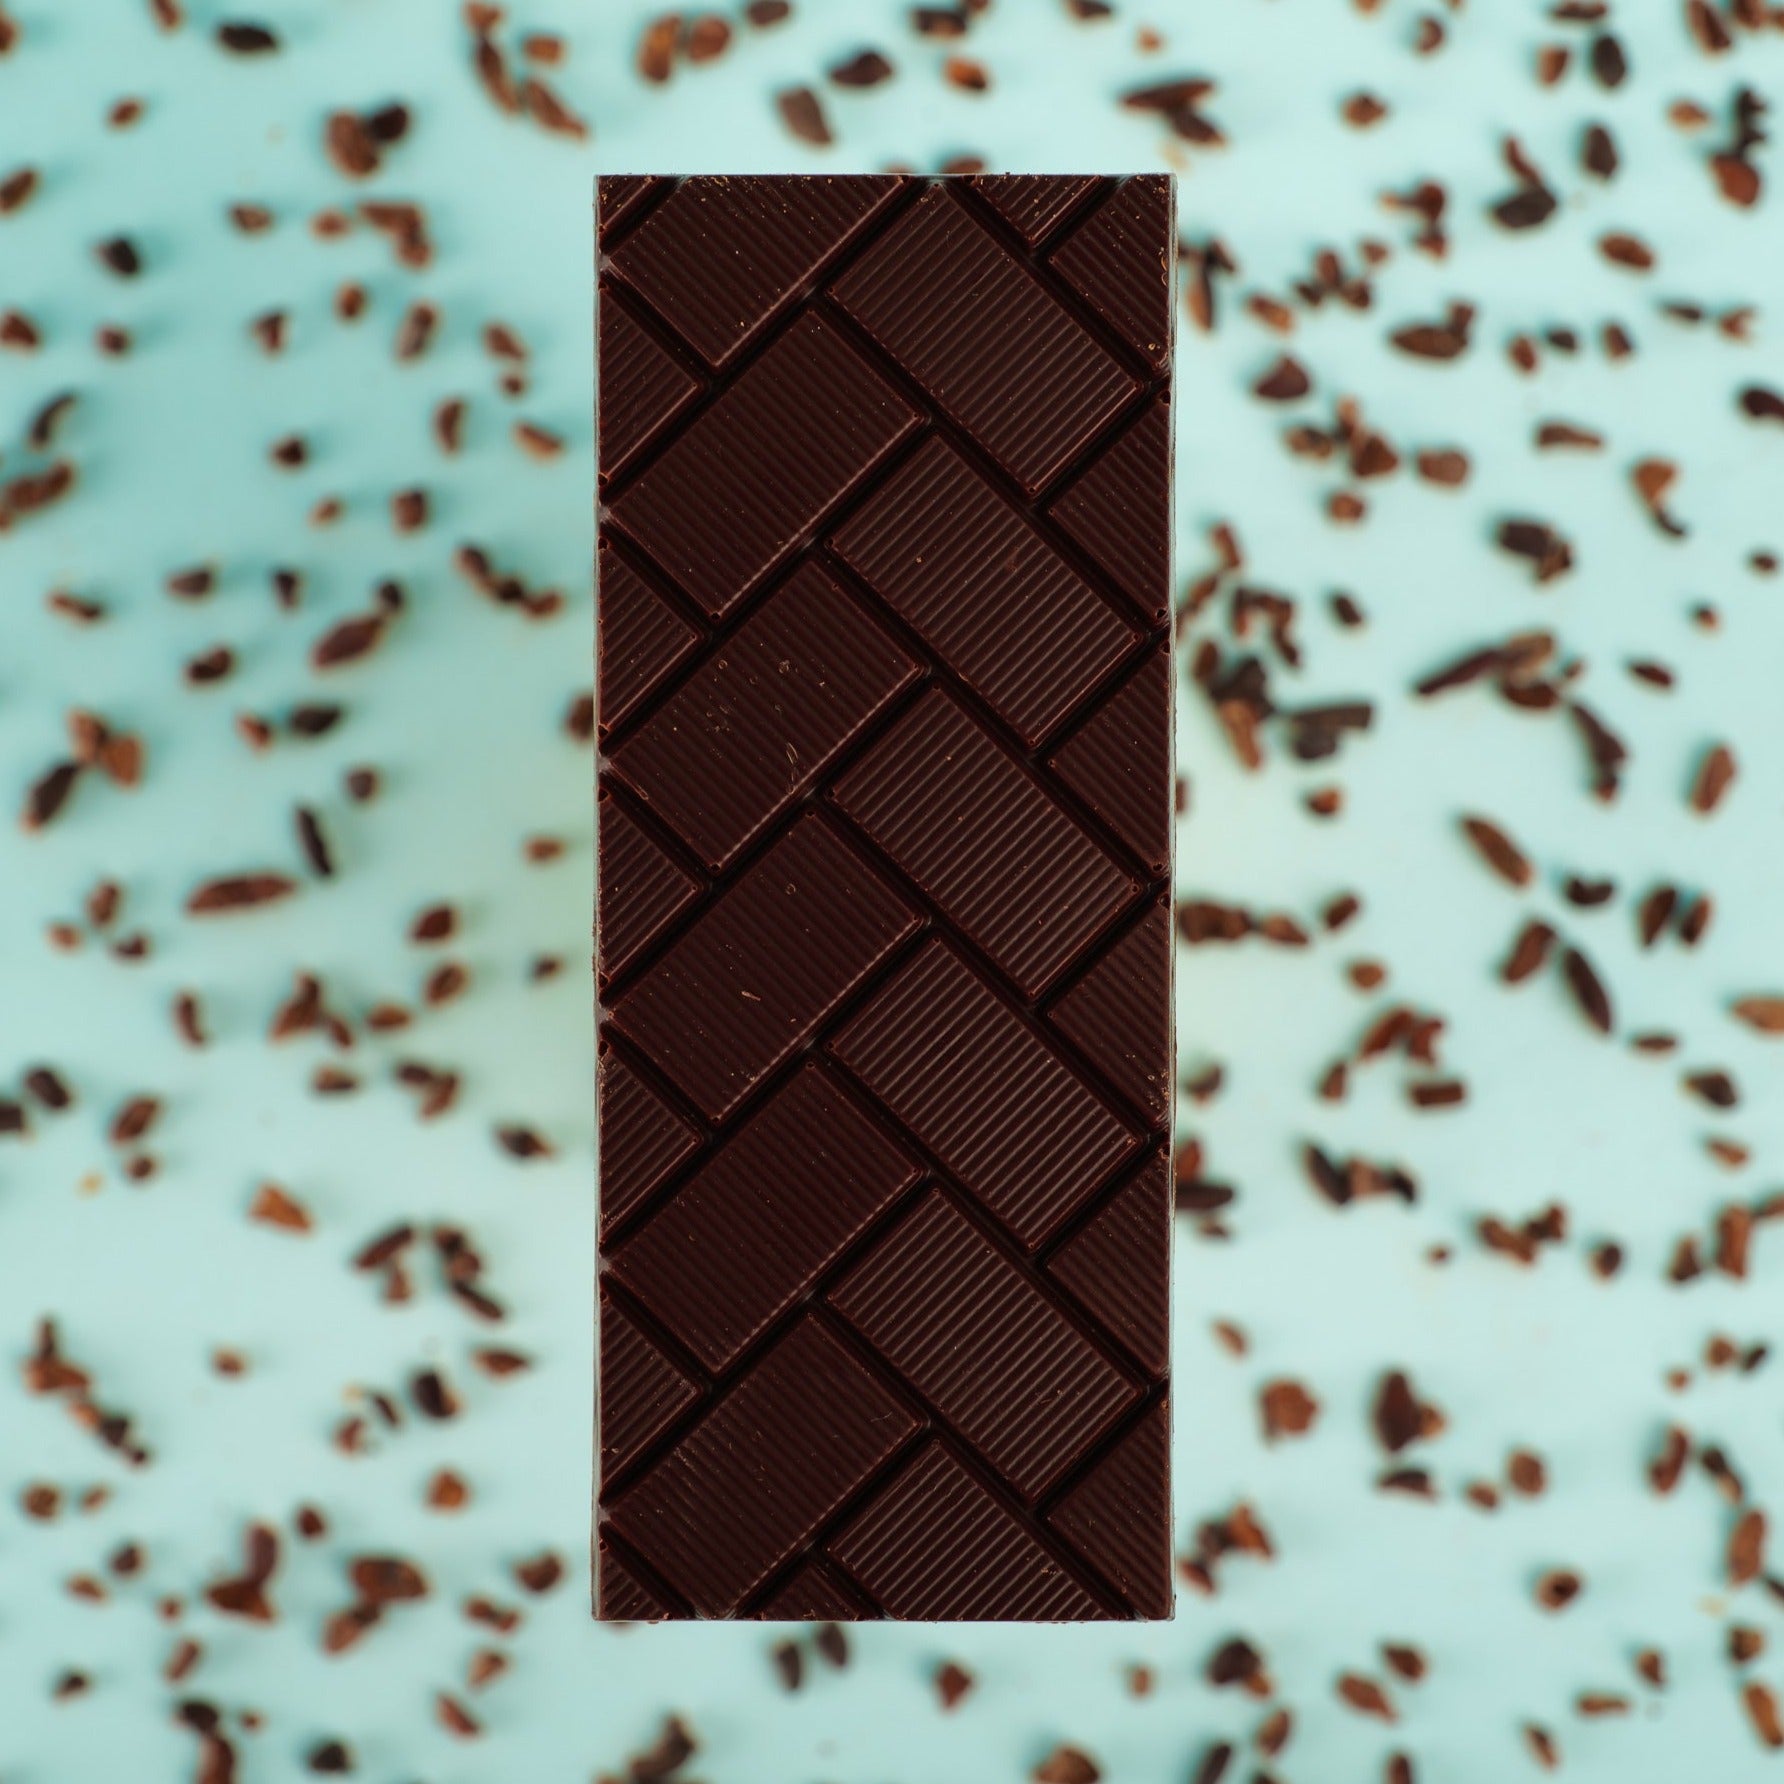 a Colombian dark chocolate bar lies on a blue background with cocoa nibs scattered around